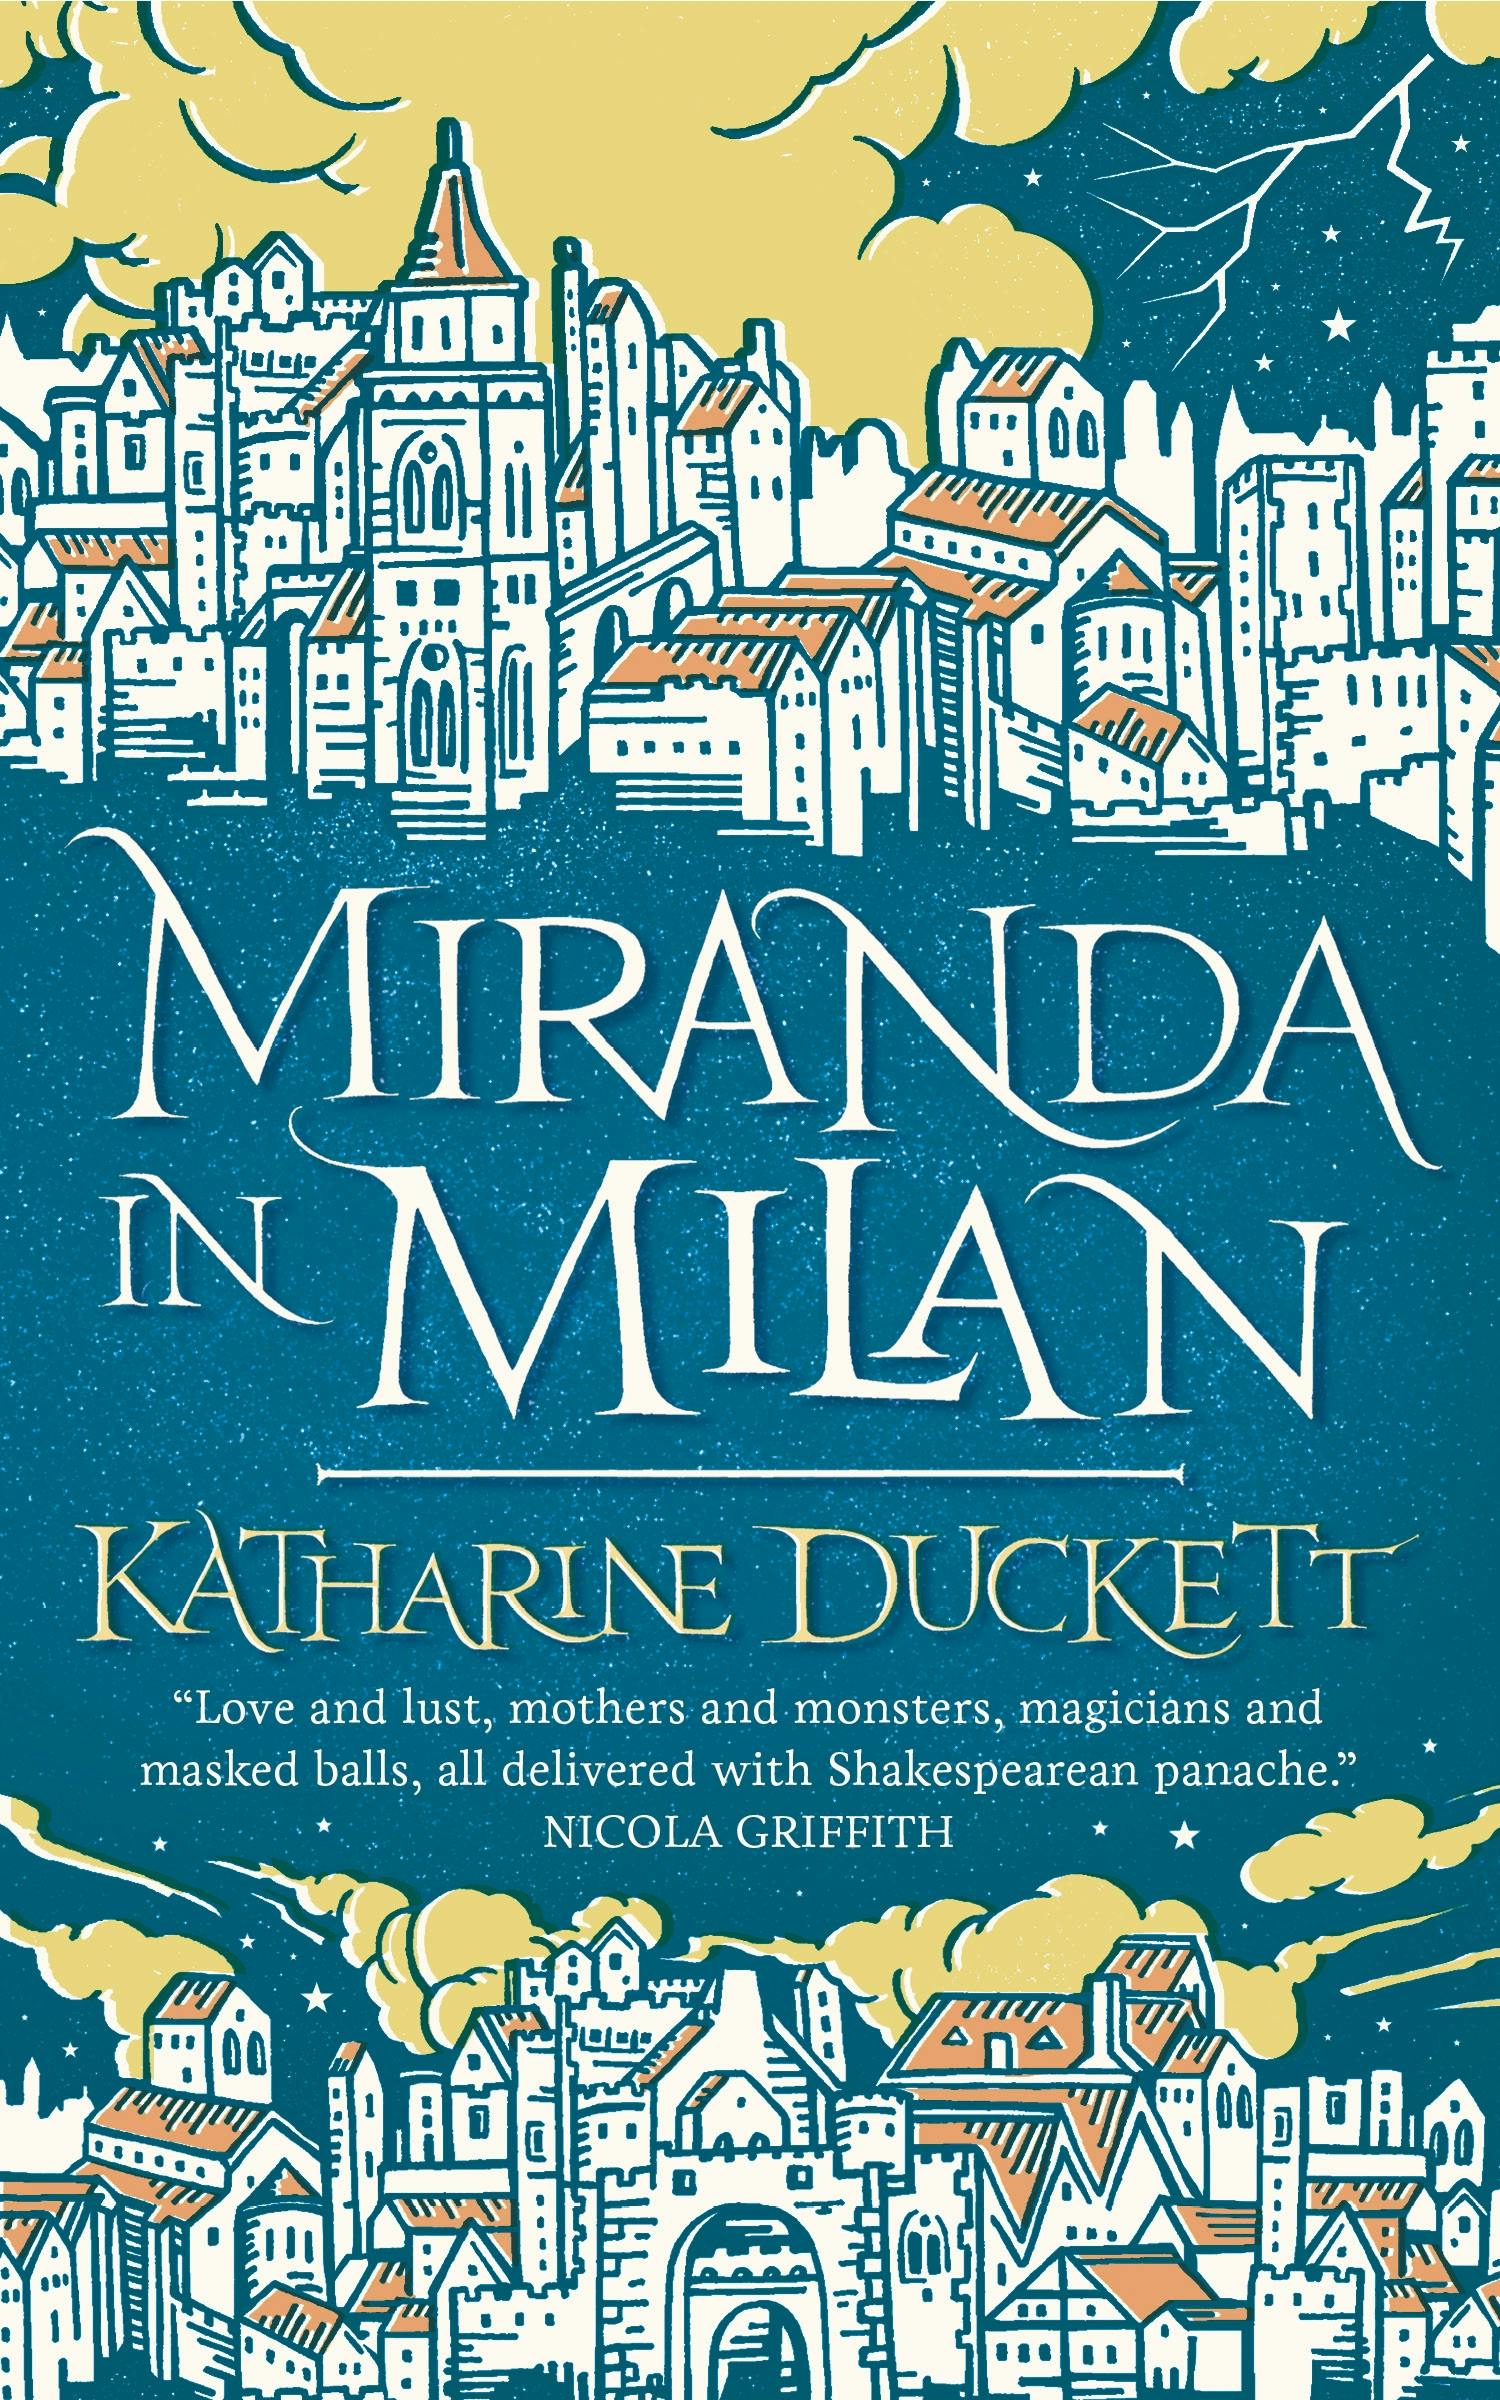 Cover for the book titled as: Miranda in Milan